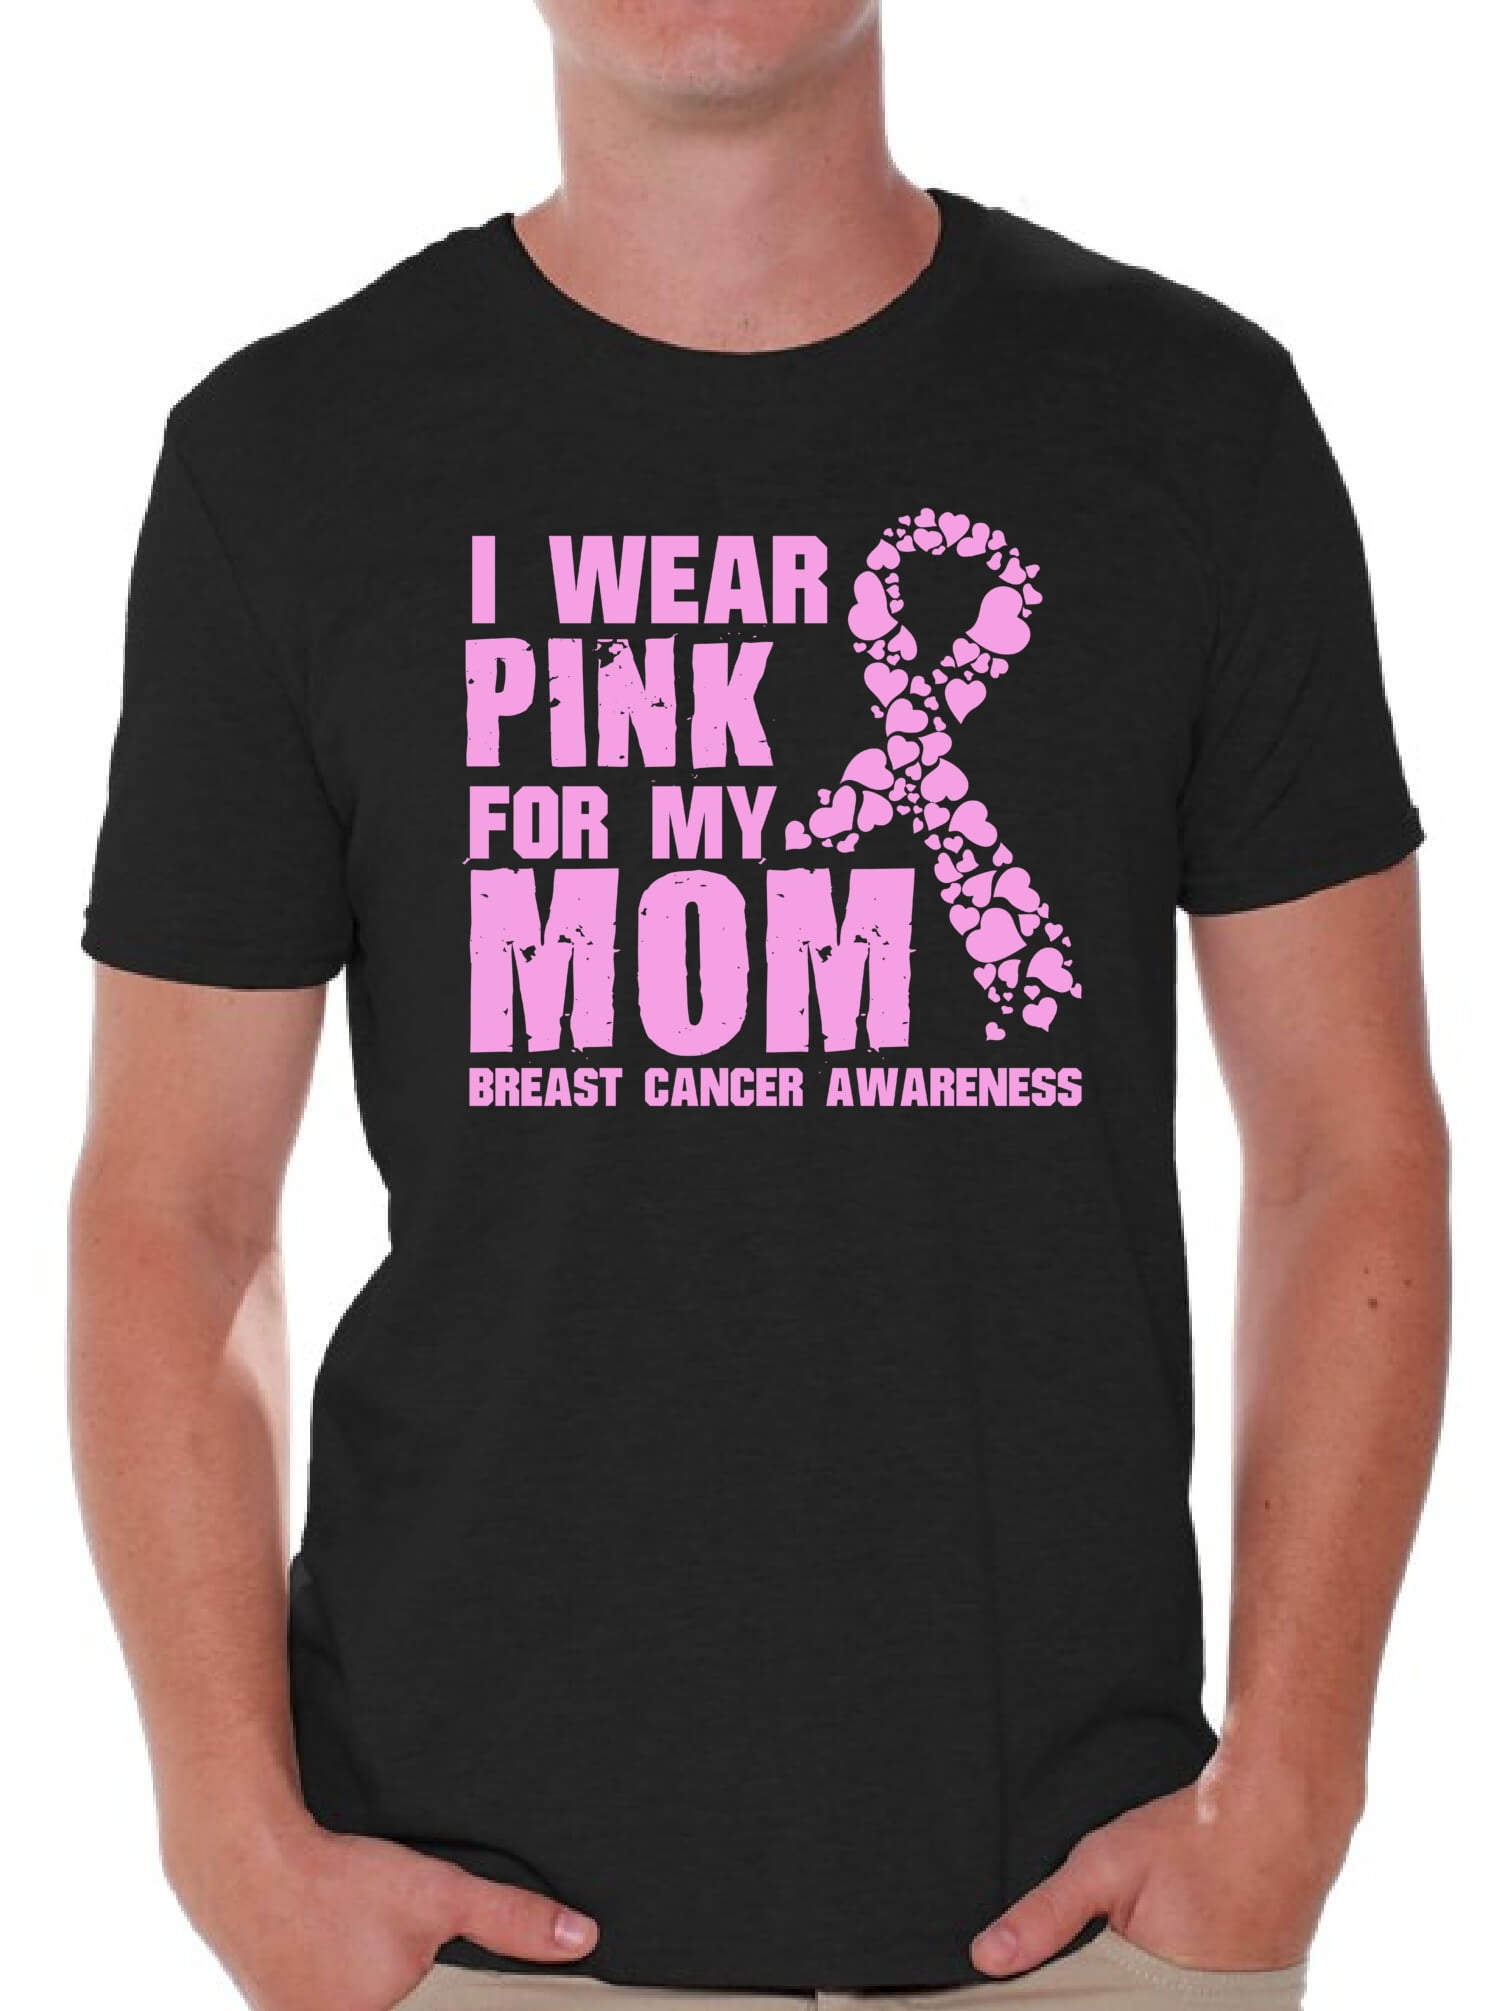 Cancer Awereness Shirts for Men Breast Cancer Awareness Shirts Pink ...